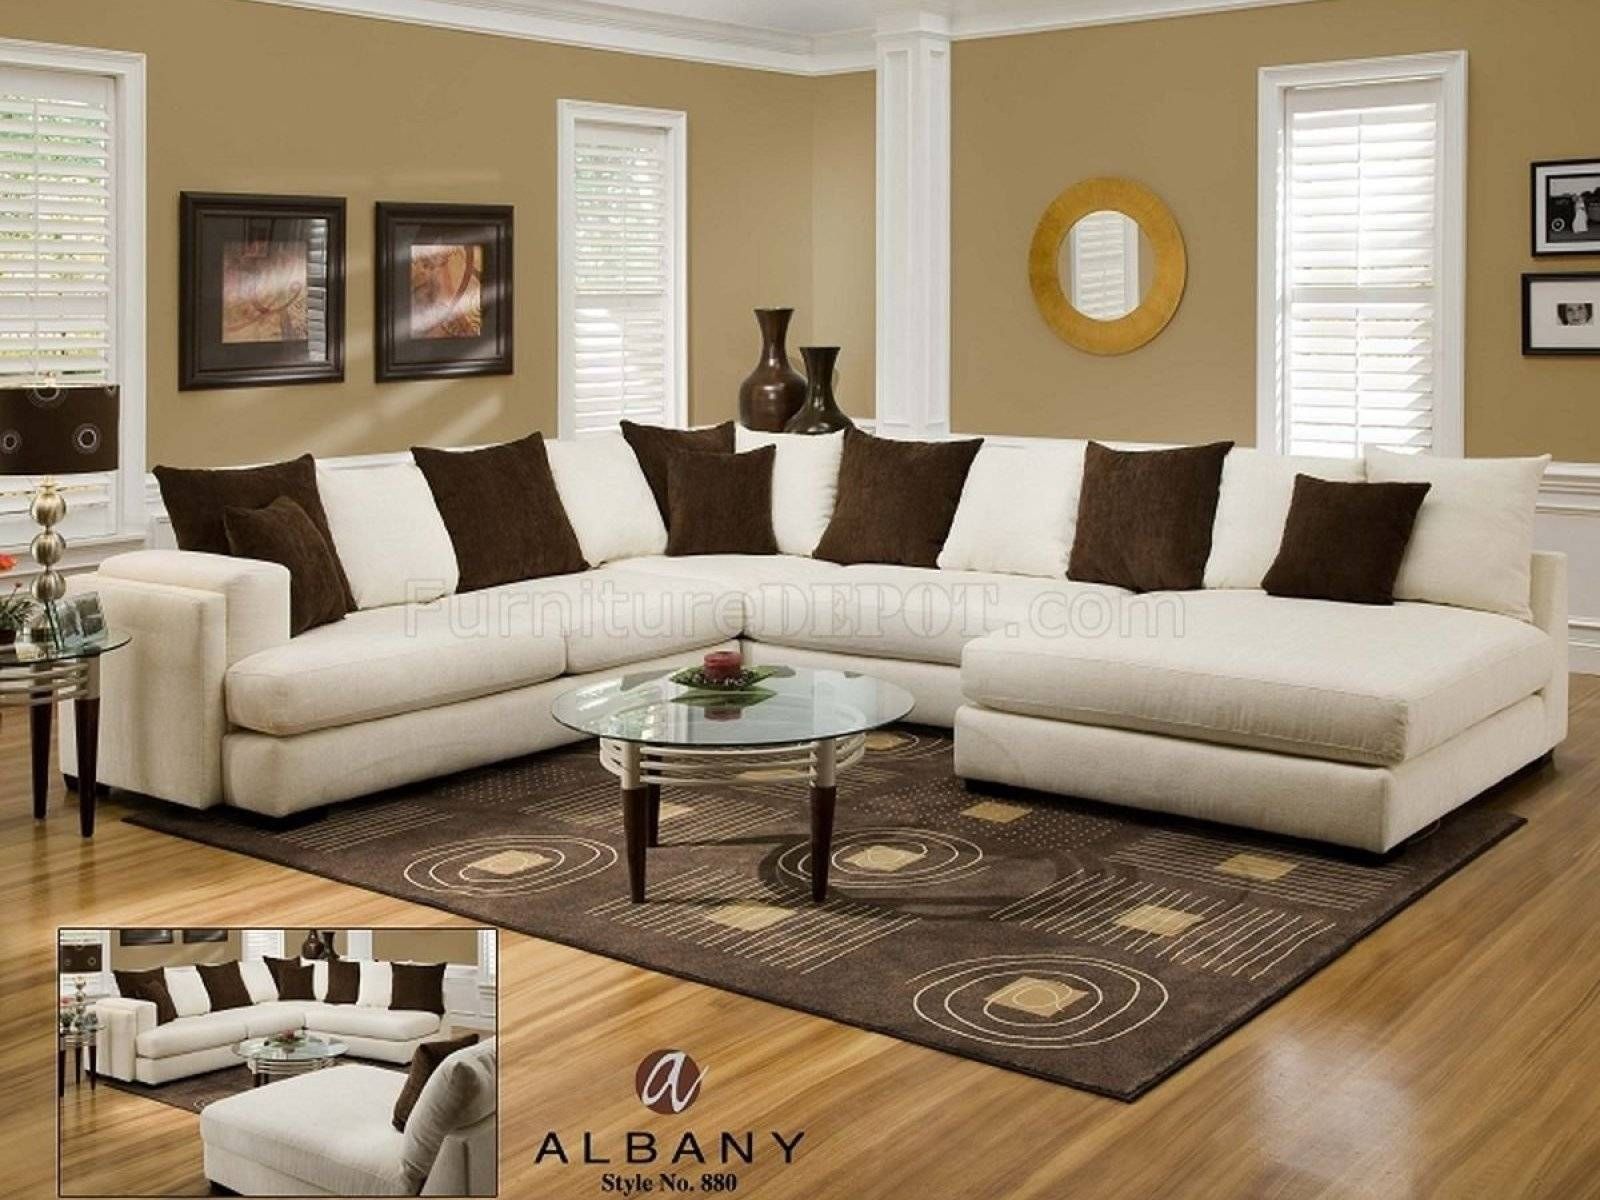 slipcover for leather sectional sofa